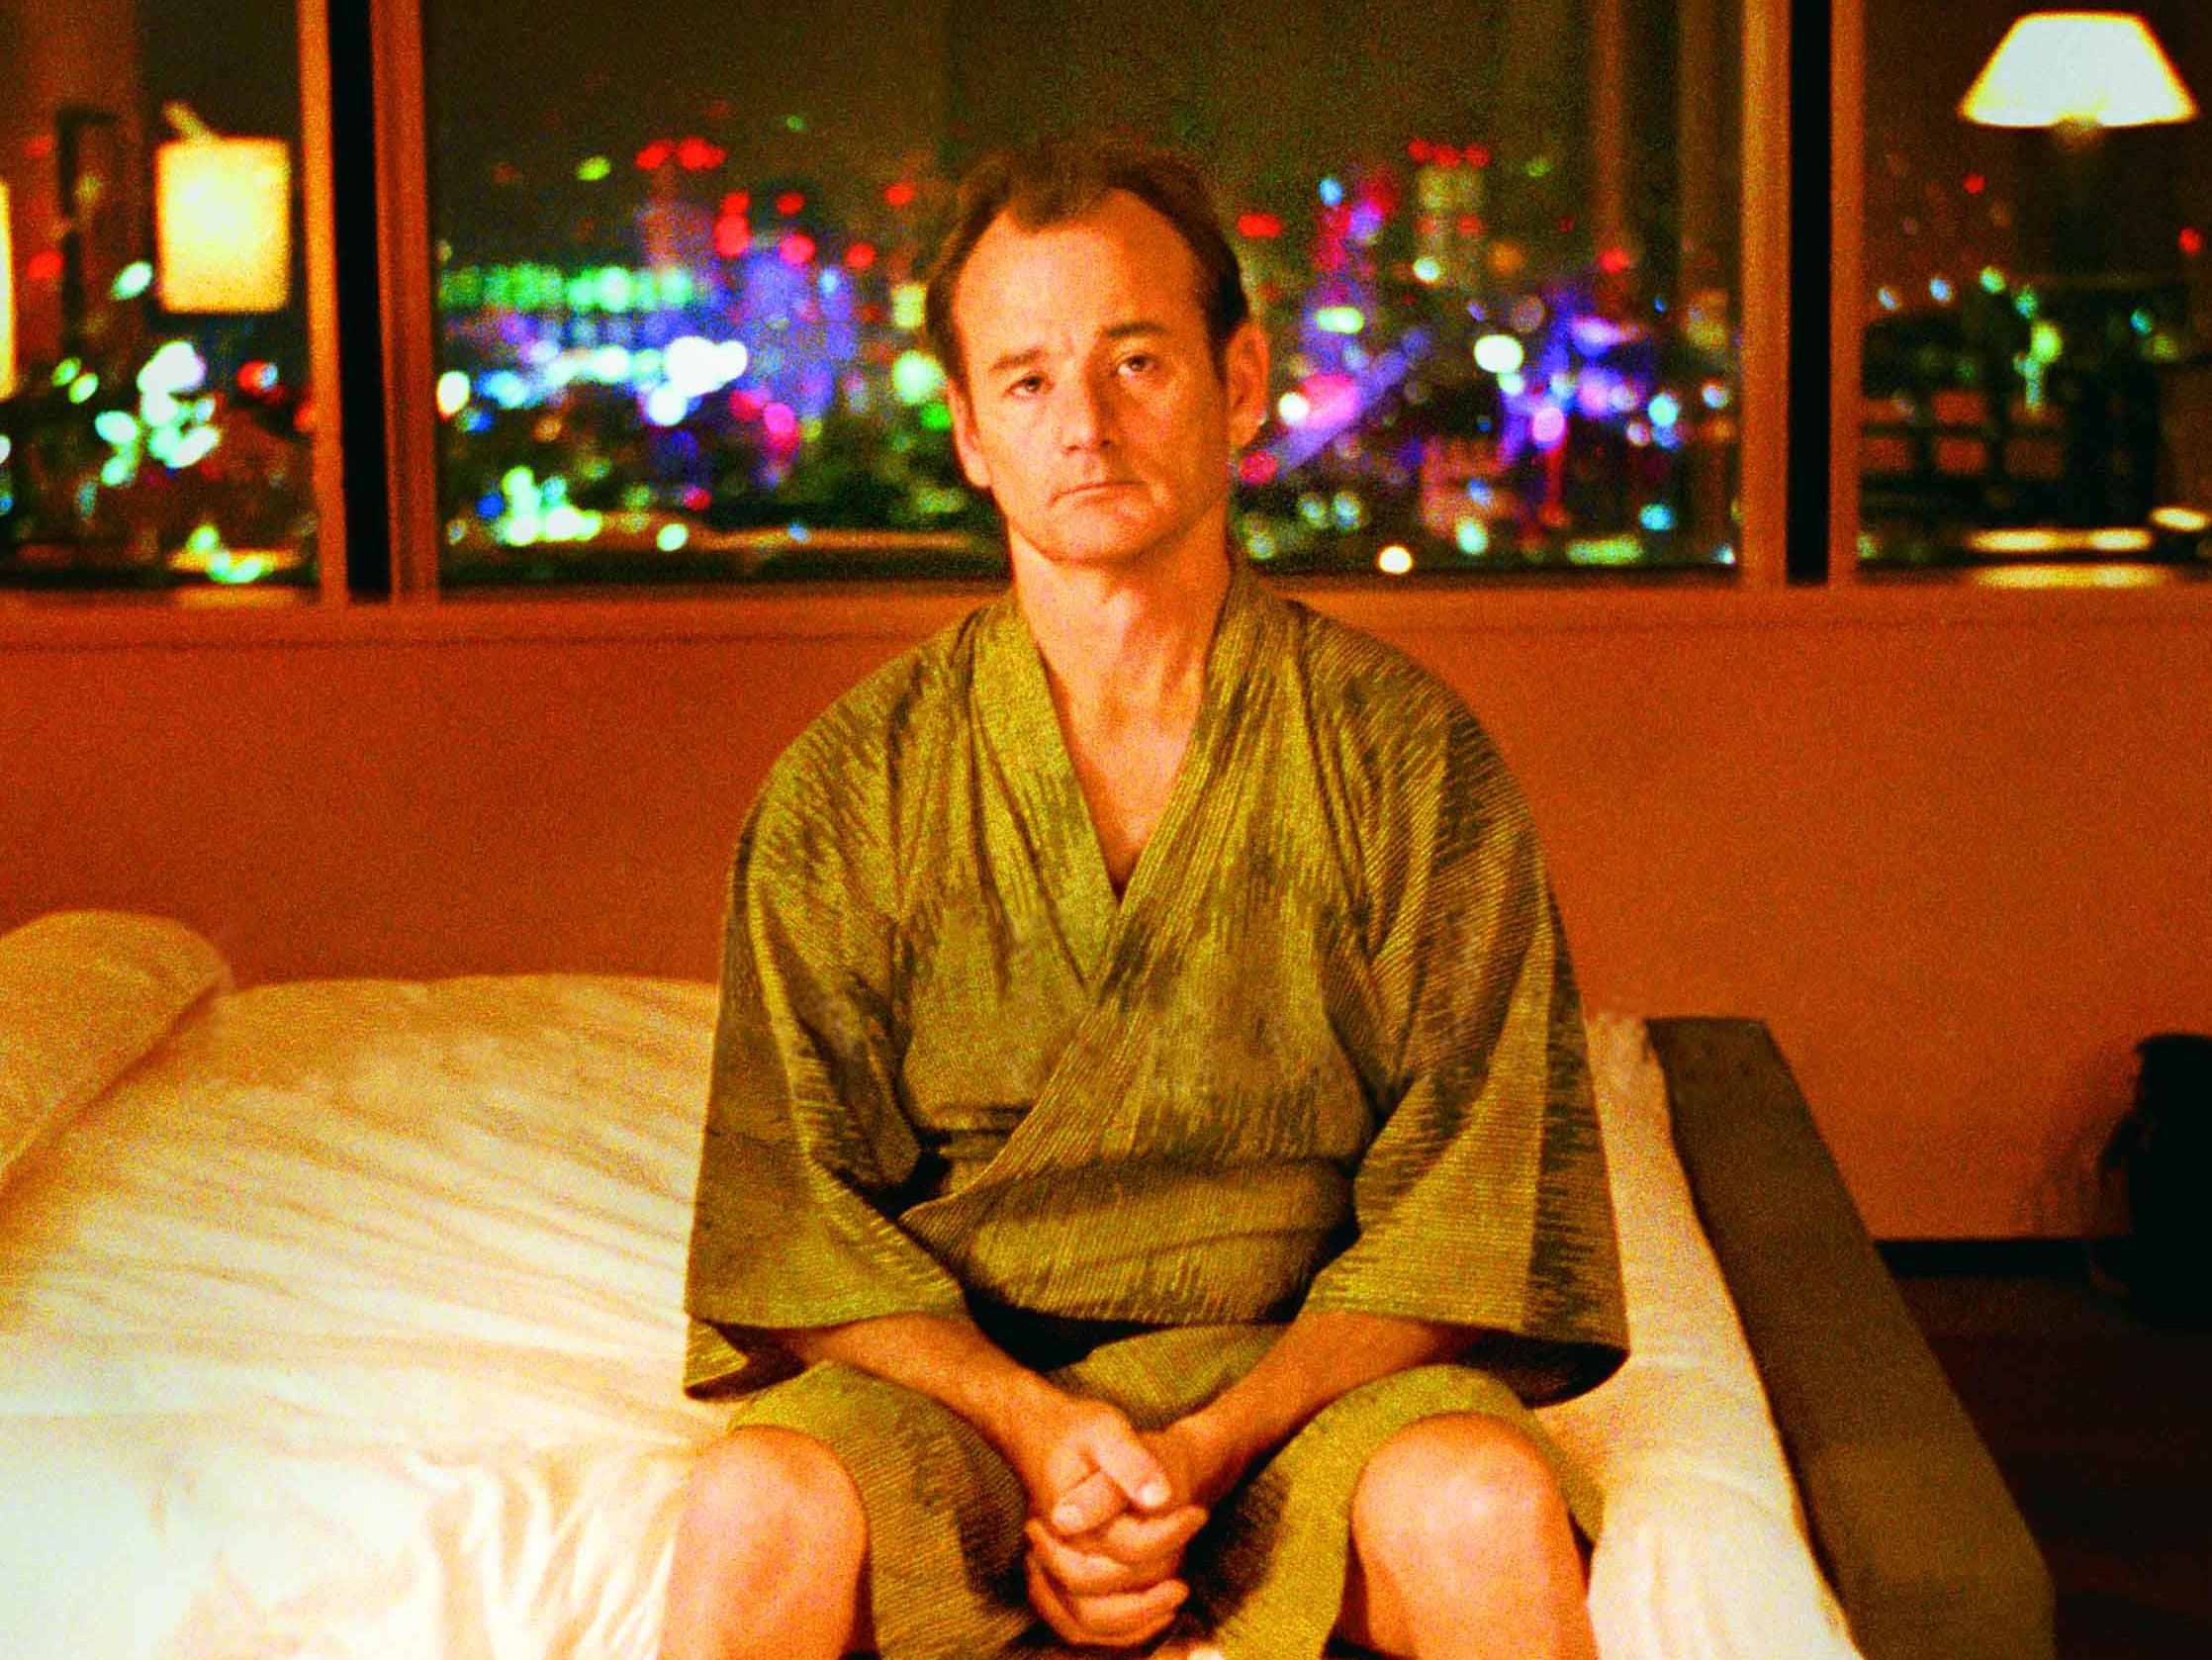 Karaoke king: Murray won plaudits for his role in ’Lost in Translation’